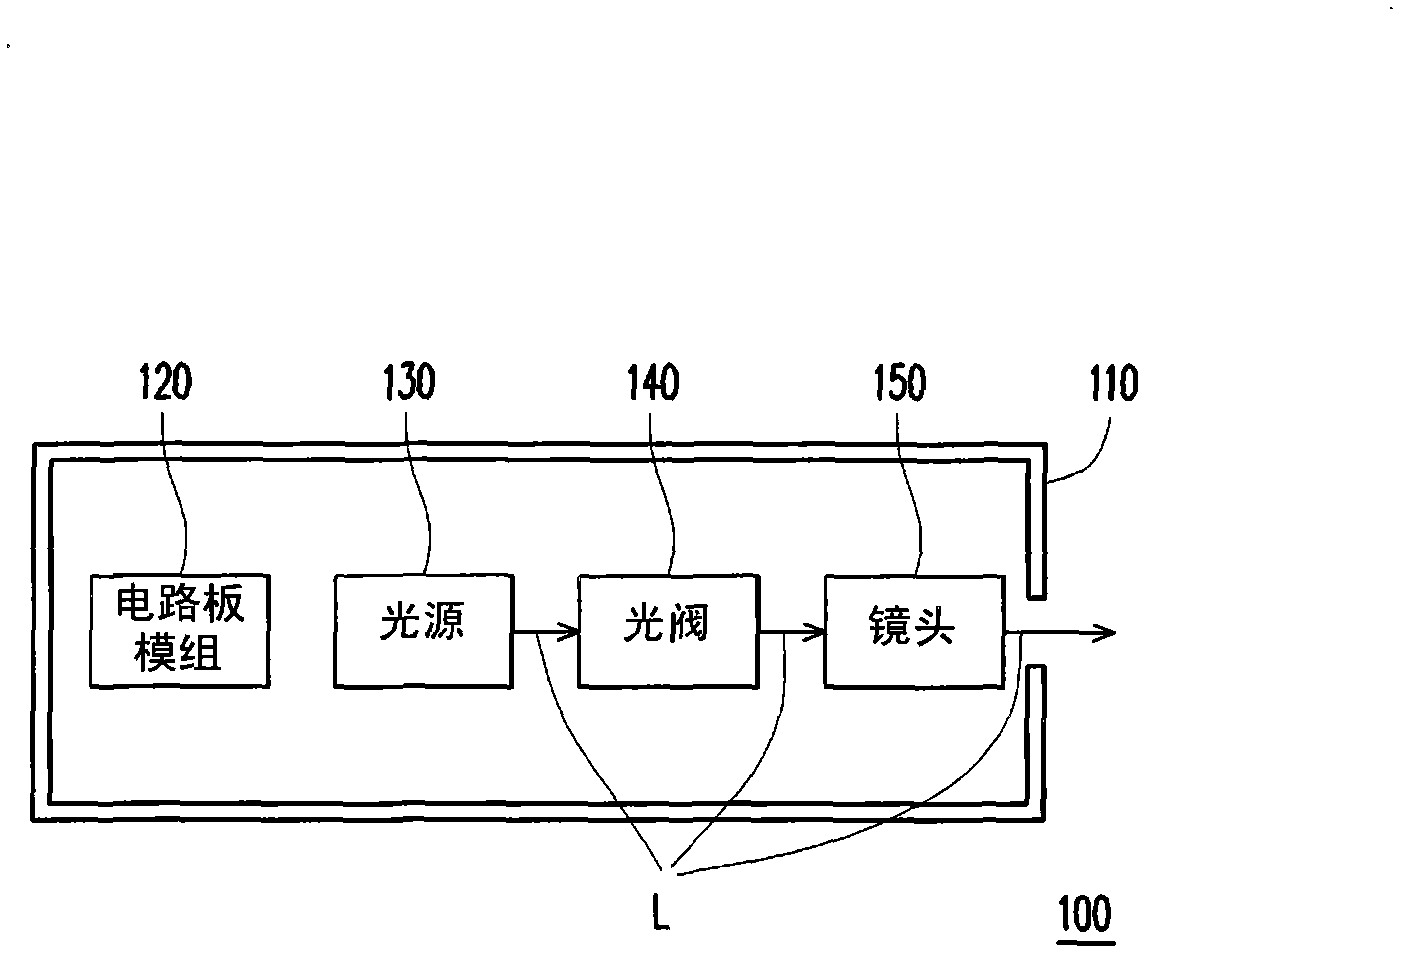 Projection device and circuit board module